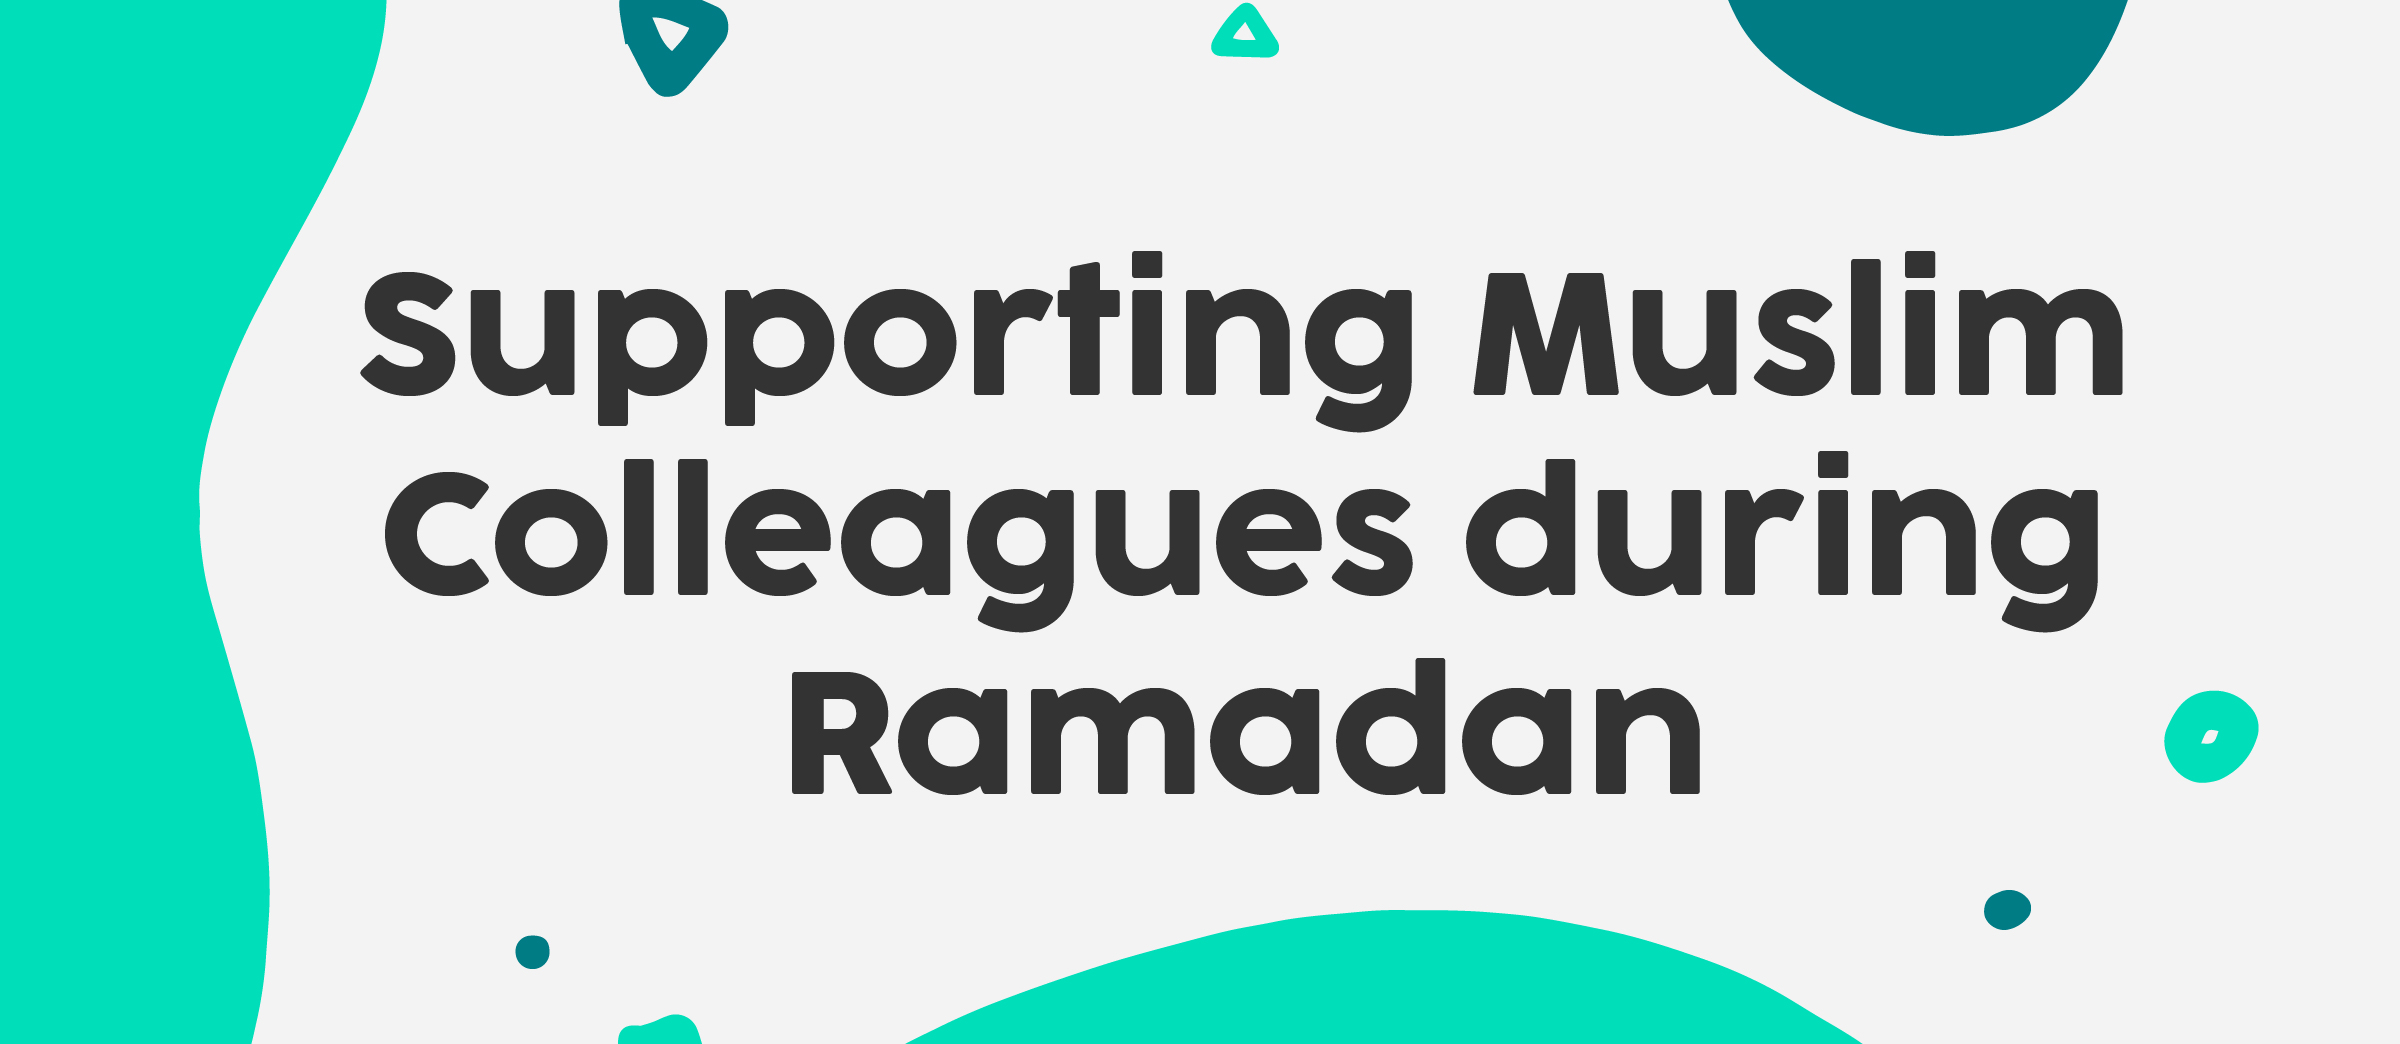 Supporting Muslim colleagues during Ramadan